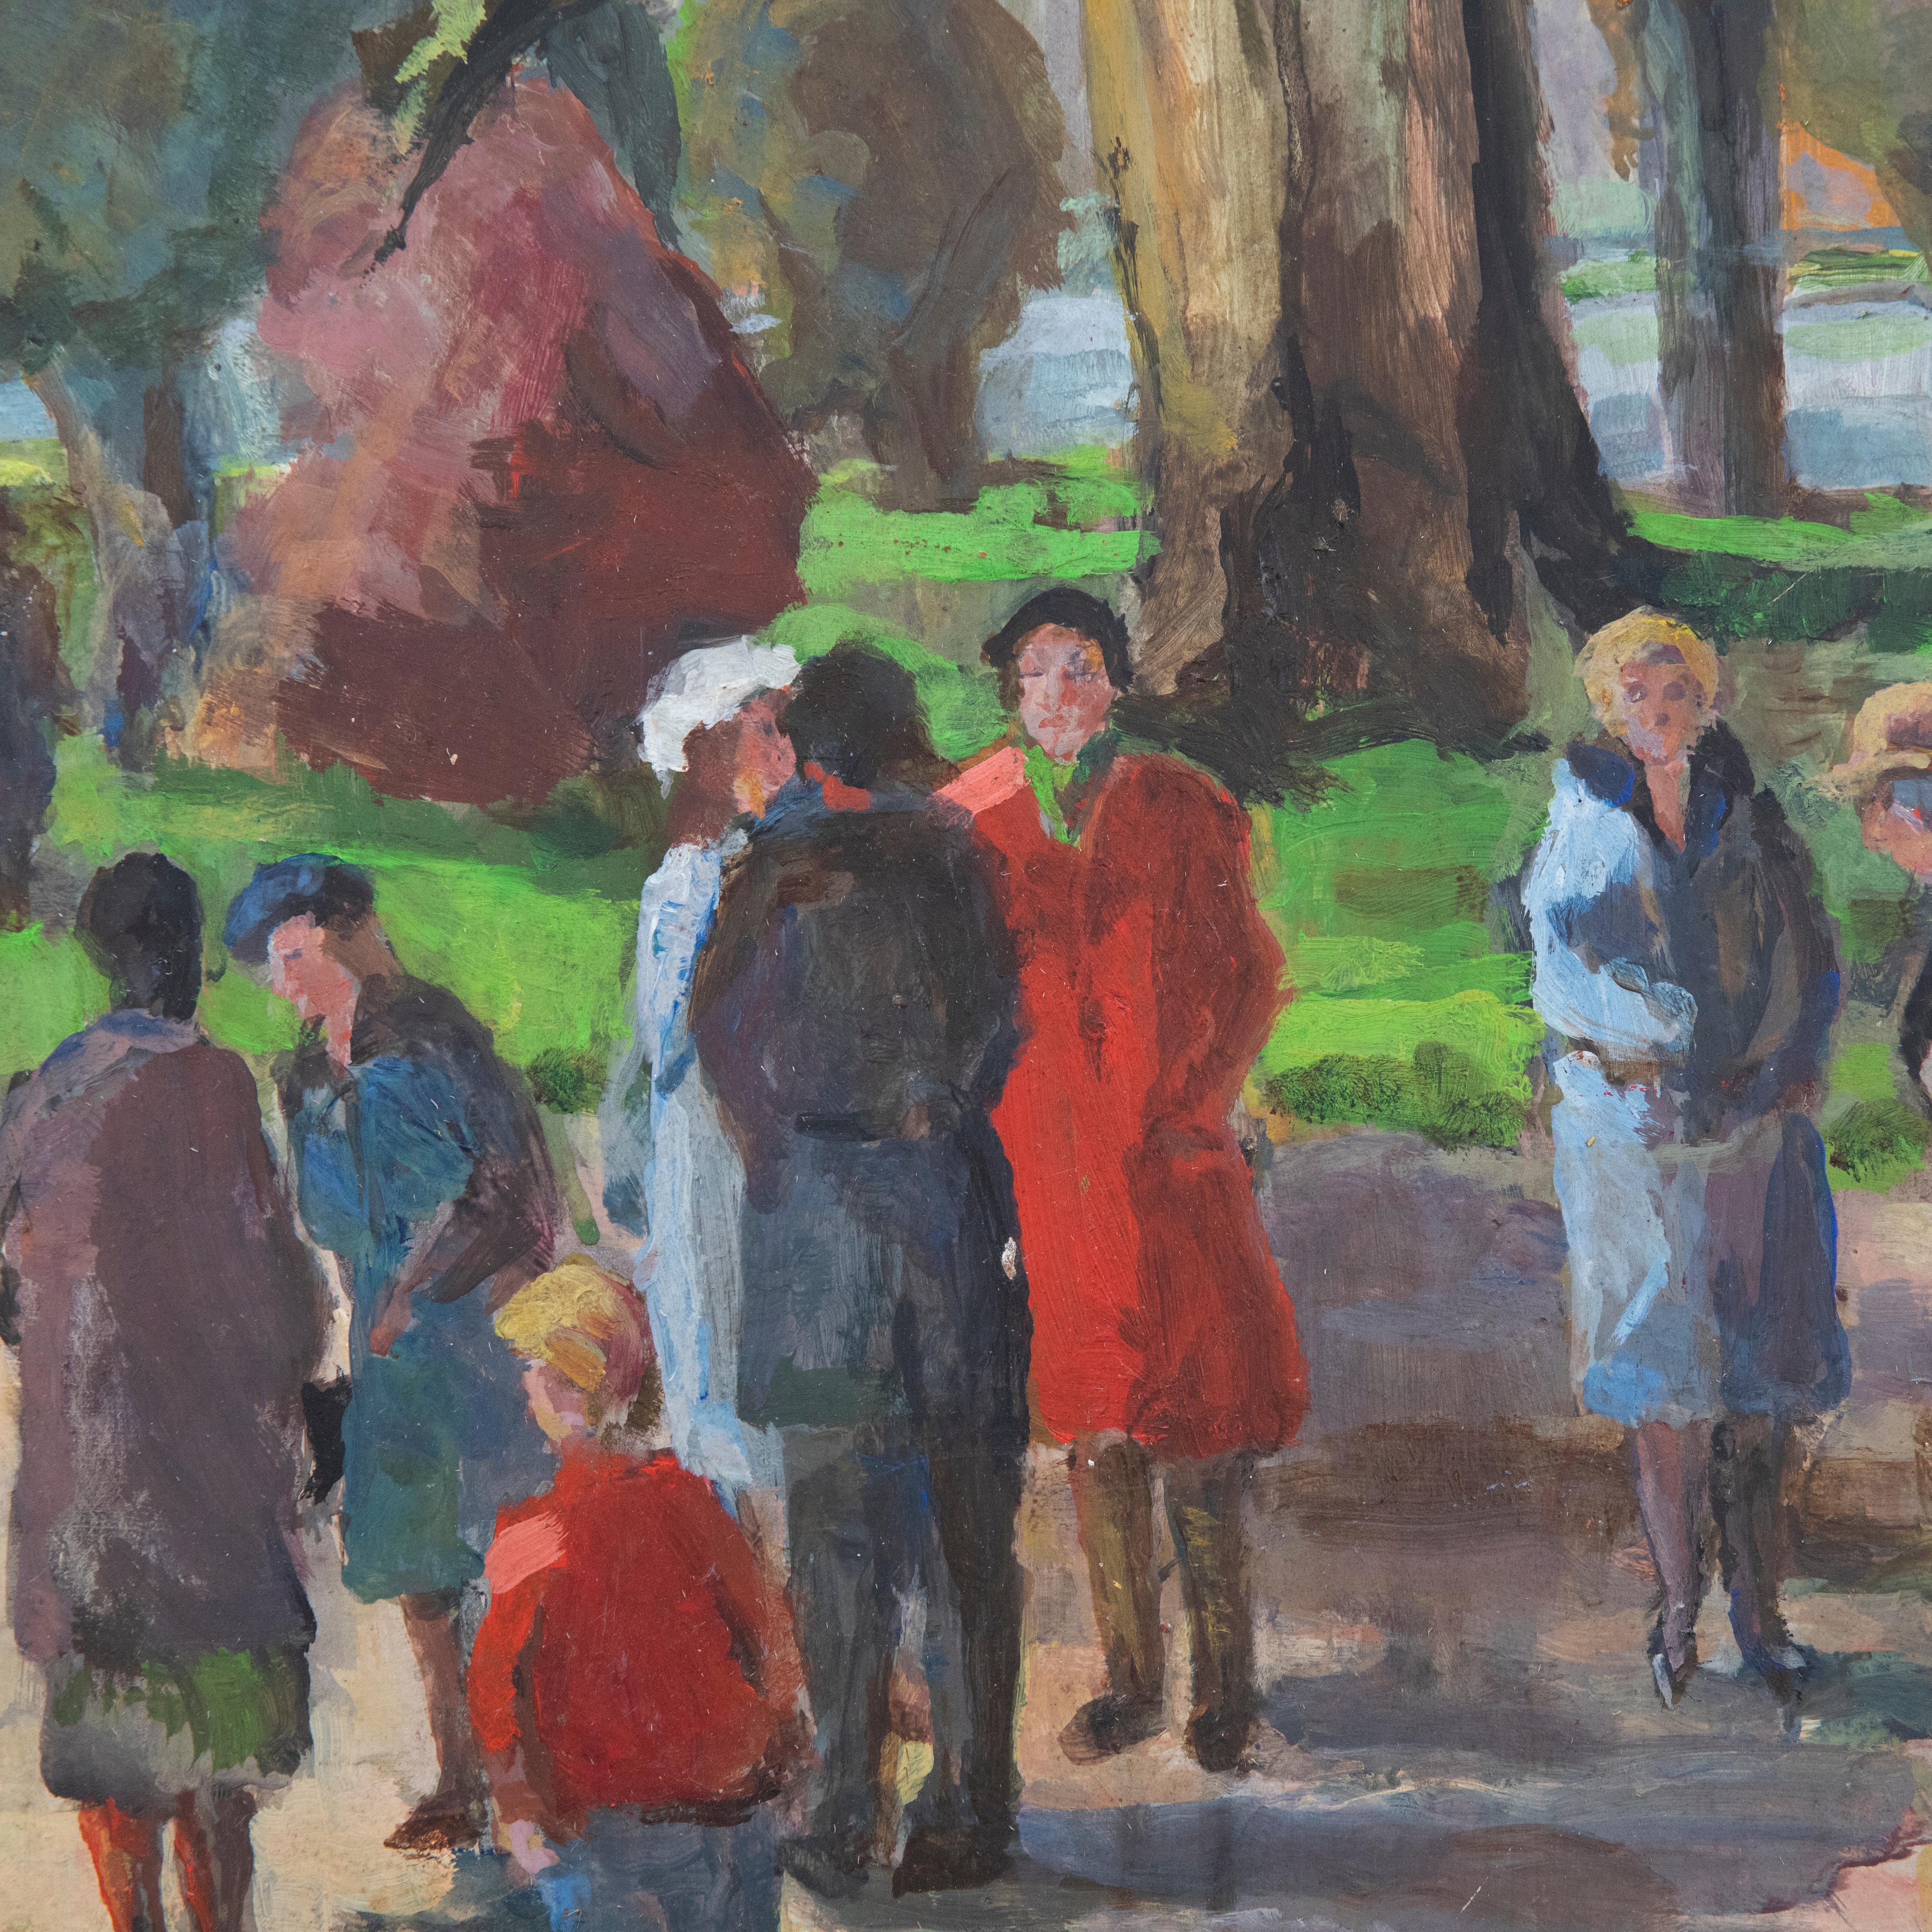 A delightful scene depicting figures in a sunlit park. The artist uses depicts highly stylised trees which curve their way across the composition. Late afternoon light can be seen reflecting off of the figure's winter coats creating a great sense of